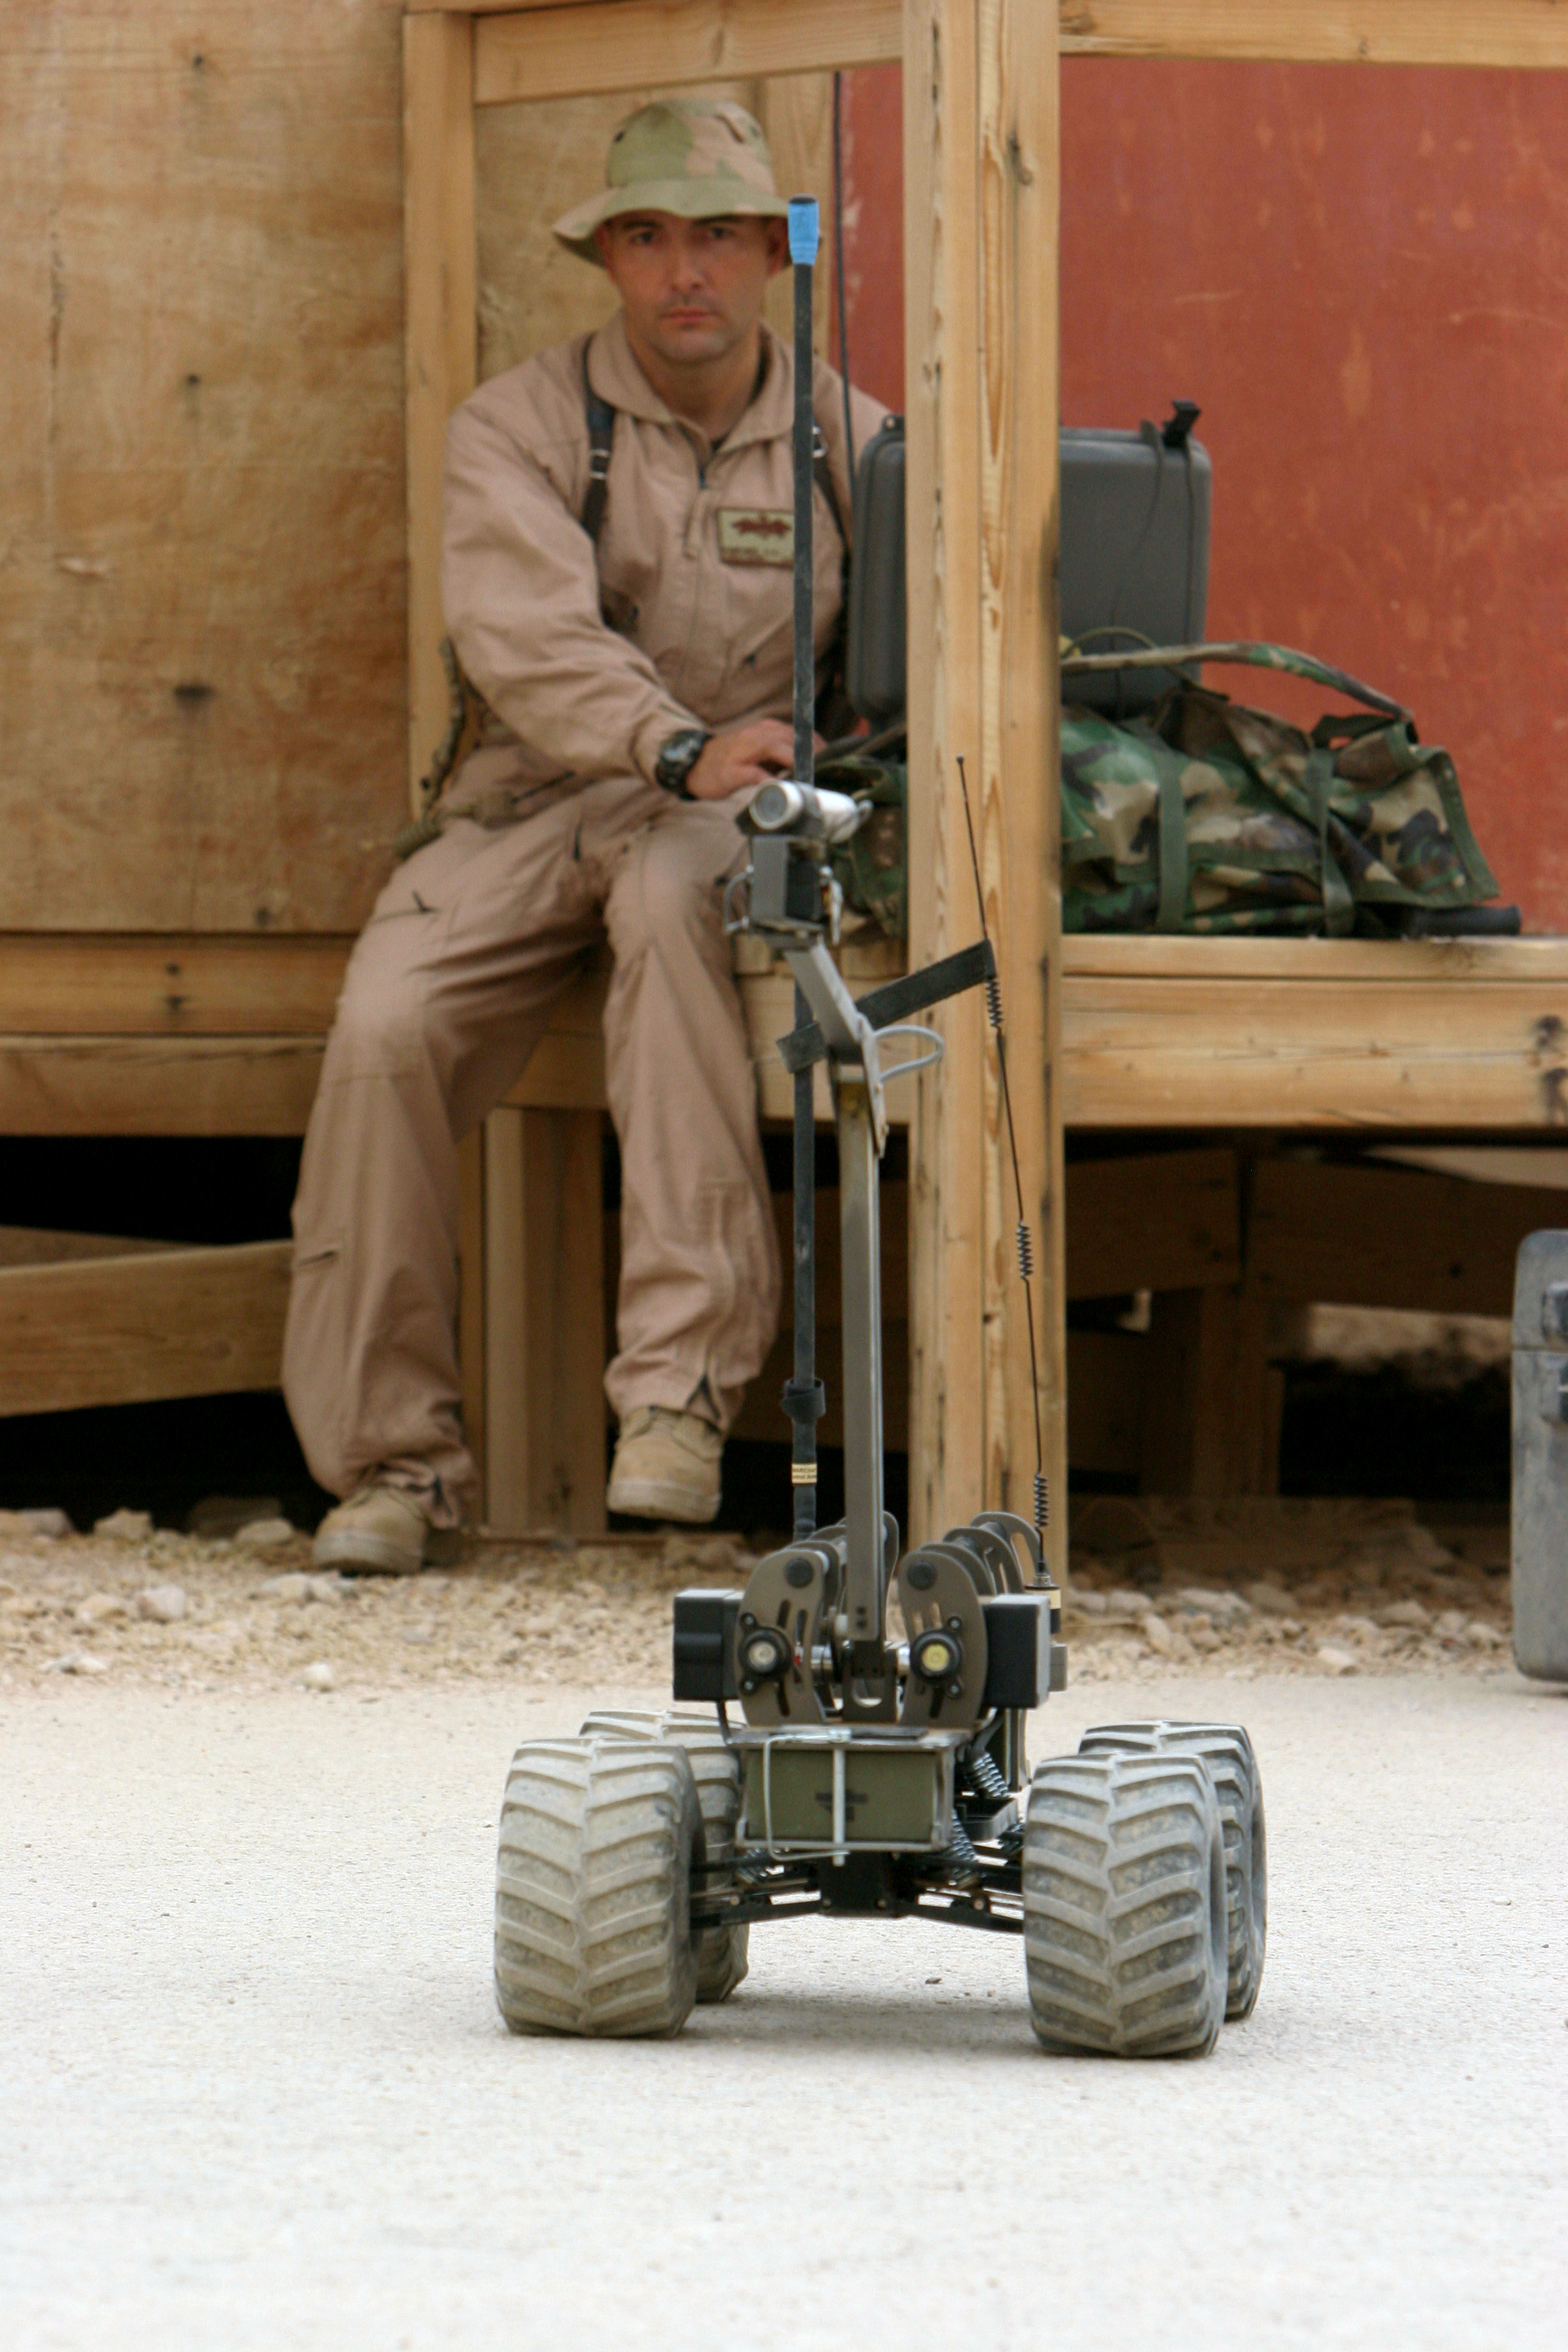 080326-N-9623R-007 Iraq (March 26, 2008) Construction Electrician 2nd Class Greg Martinez, assigned to the convoy security element (CSE ) of Naval Mobile Construction Battalion (NMCB) 17, controls the MARCBOT IV, a remote controlled vehicle mounted with a video camera which is used to investigate suspicious areas without putting team members at risk. NMCB -17 CSE teams are highly trained Seabees tasked with the safe movement of various convoys to and from their missions. NMCB-17, also known as the "Desert Battalion", is to Iraq and other areas of operations supporting Operation Iraqi Freedom and Enduring Freedom. U.S. Navy photo by Mass Communication Specialist 2nd Class Kenneth W. Robinson (Released)